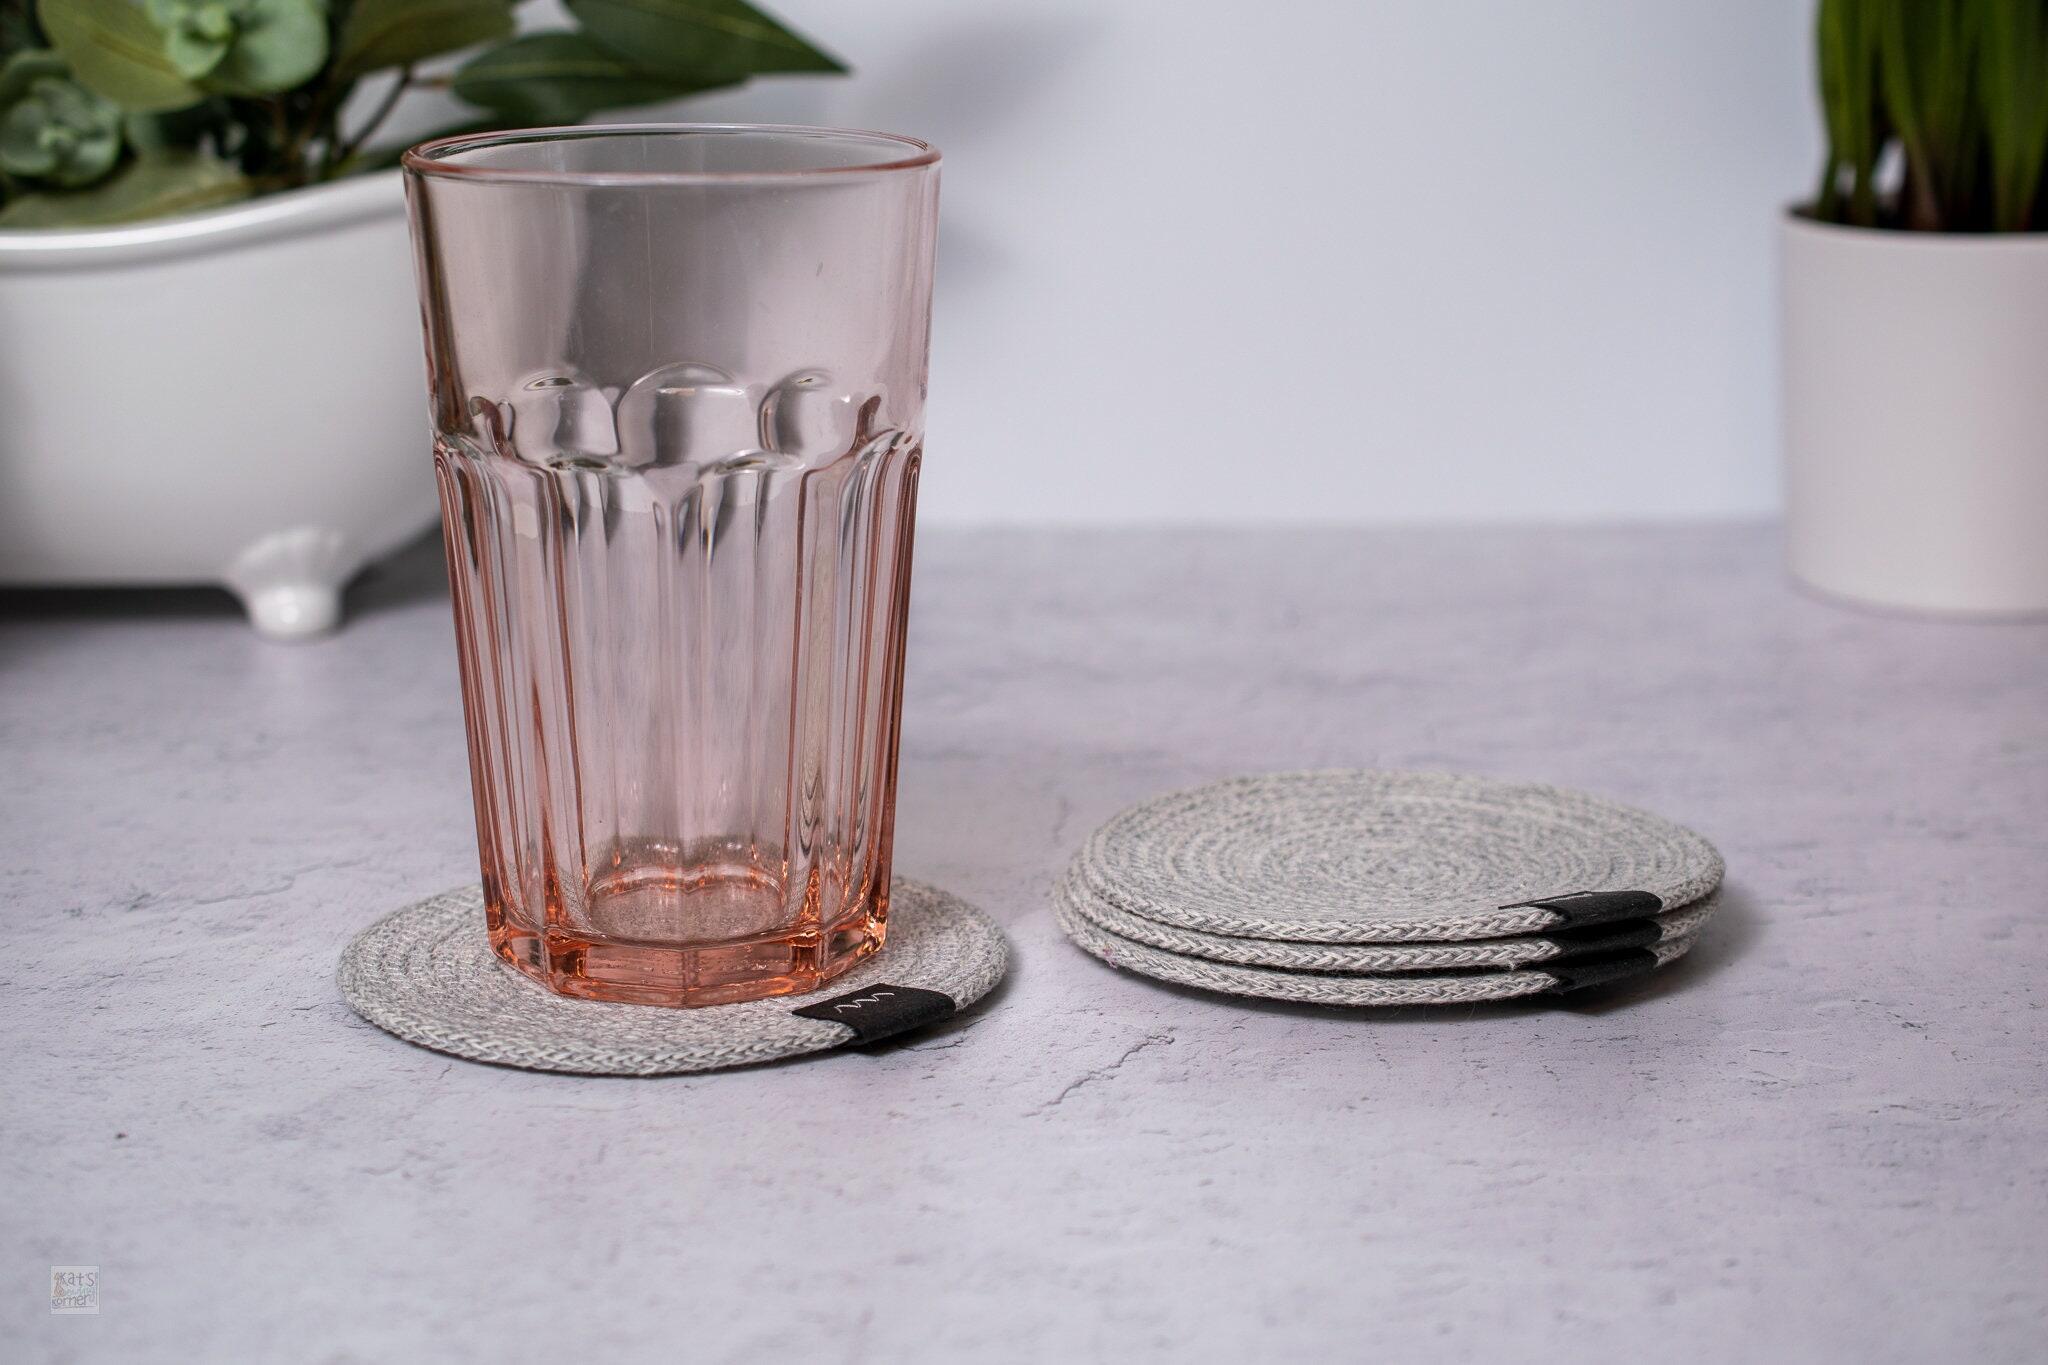 Coasters Set - Made From 100% Recycled Plastic